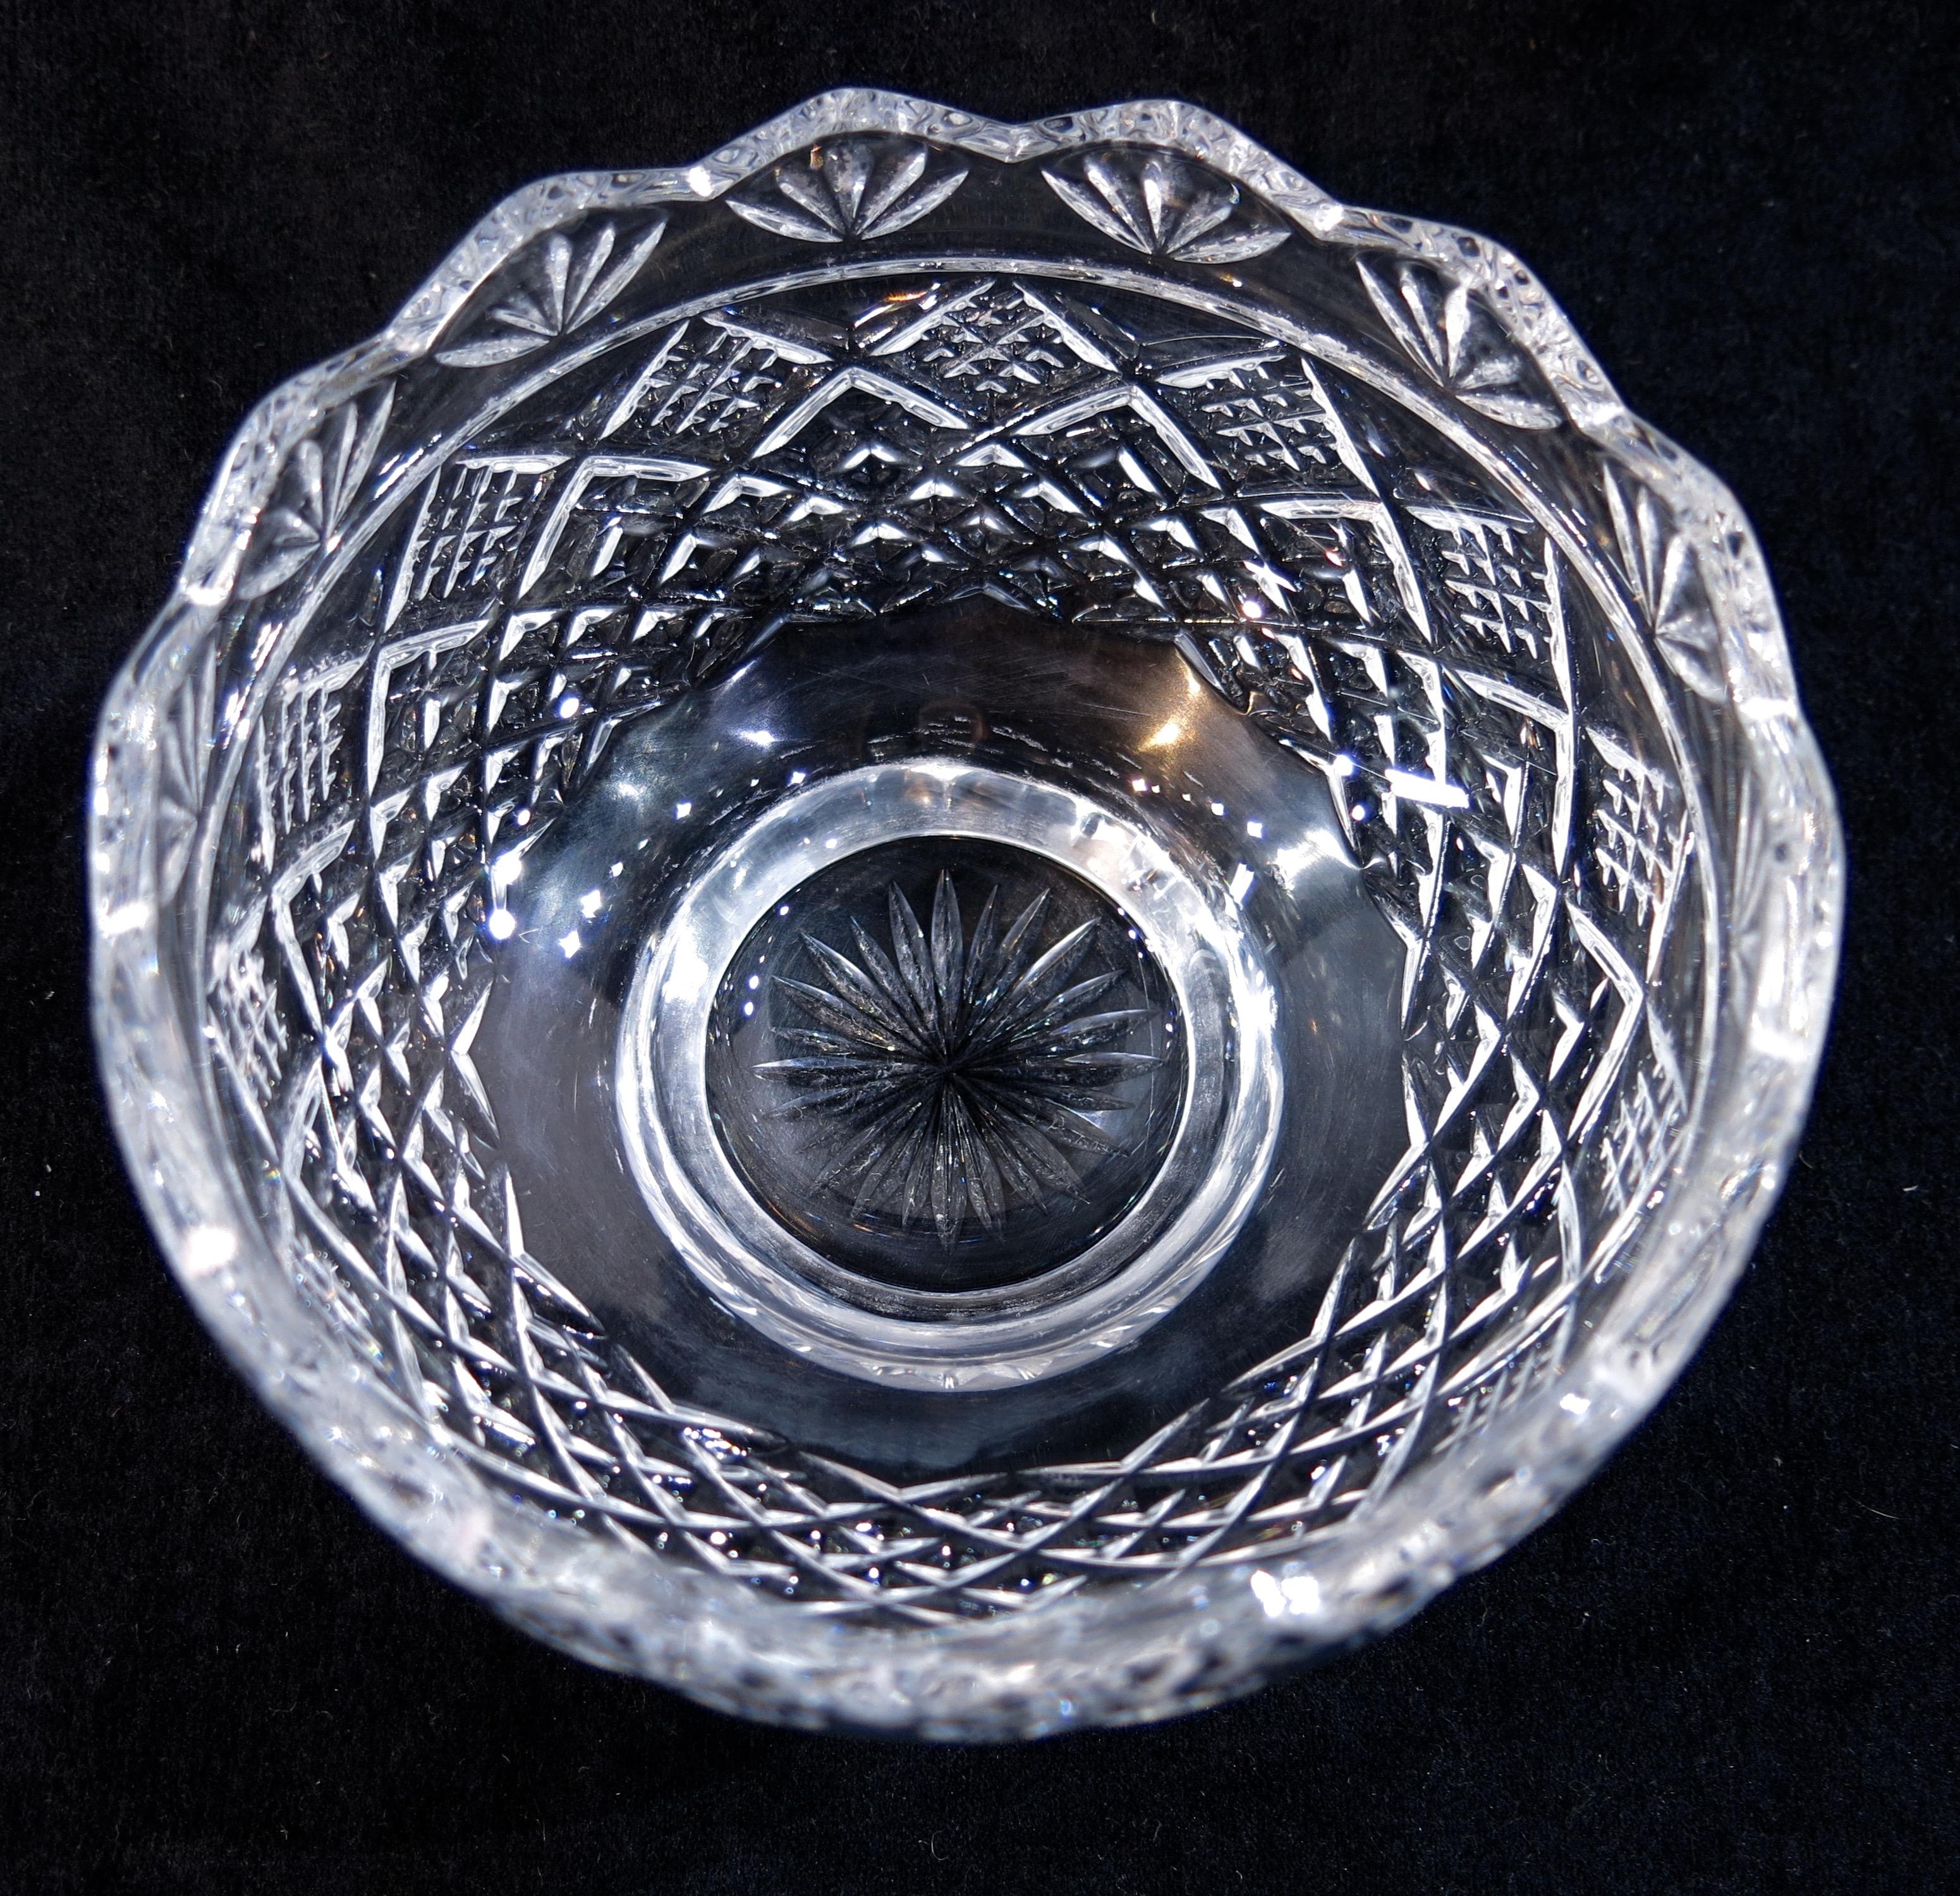 From our huge selection of epergne replacement bowls, here is a round, 3